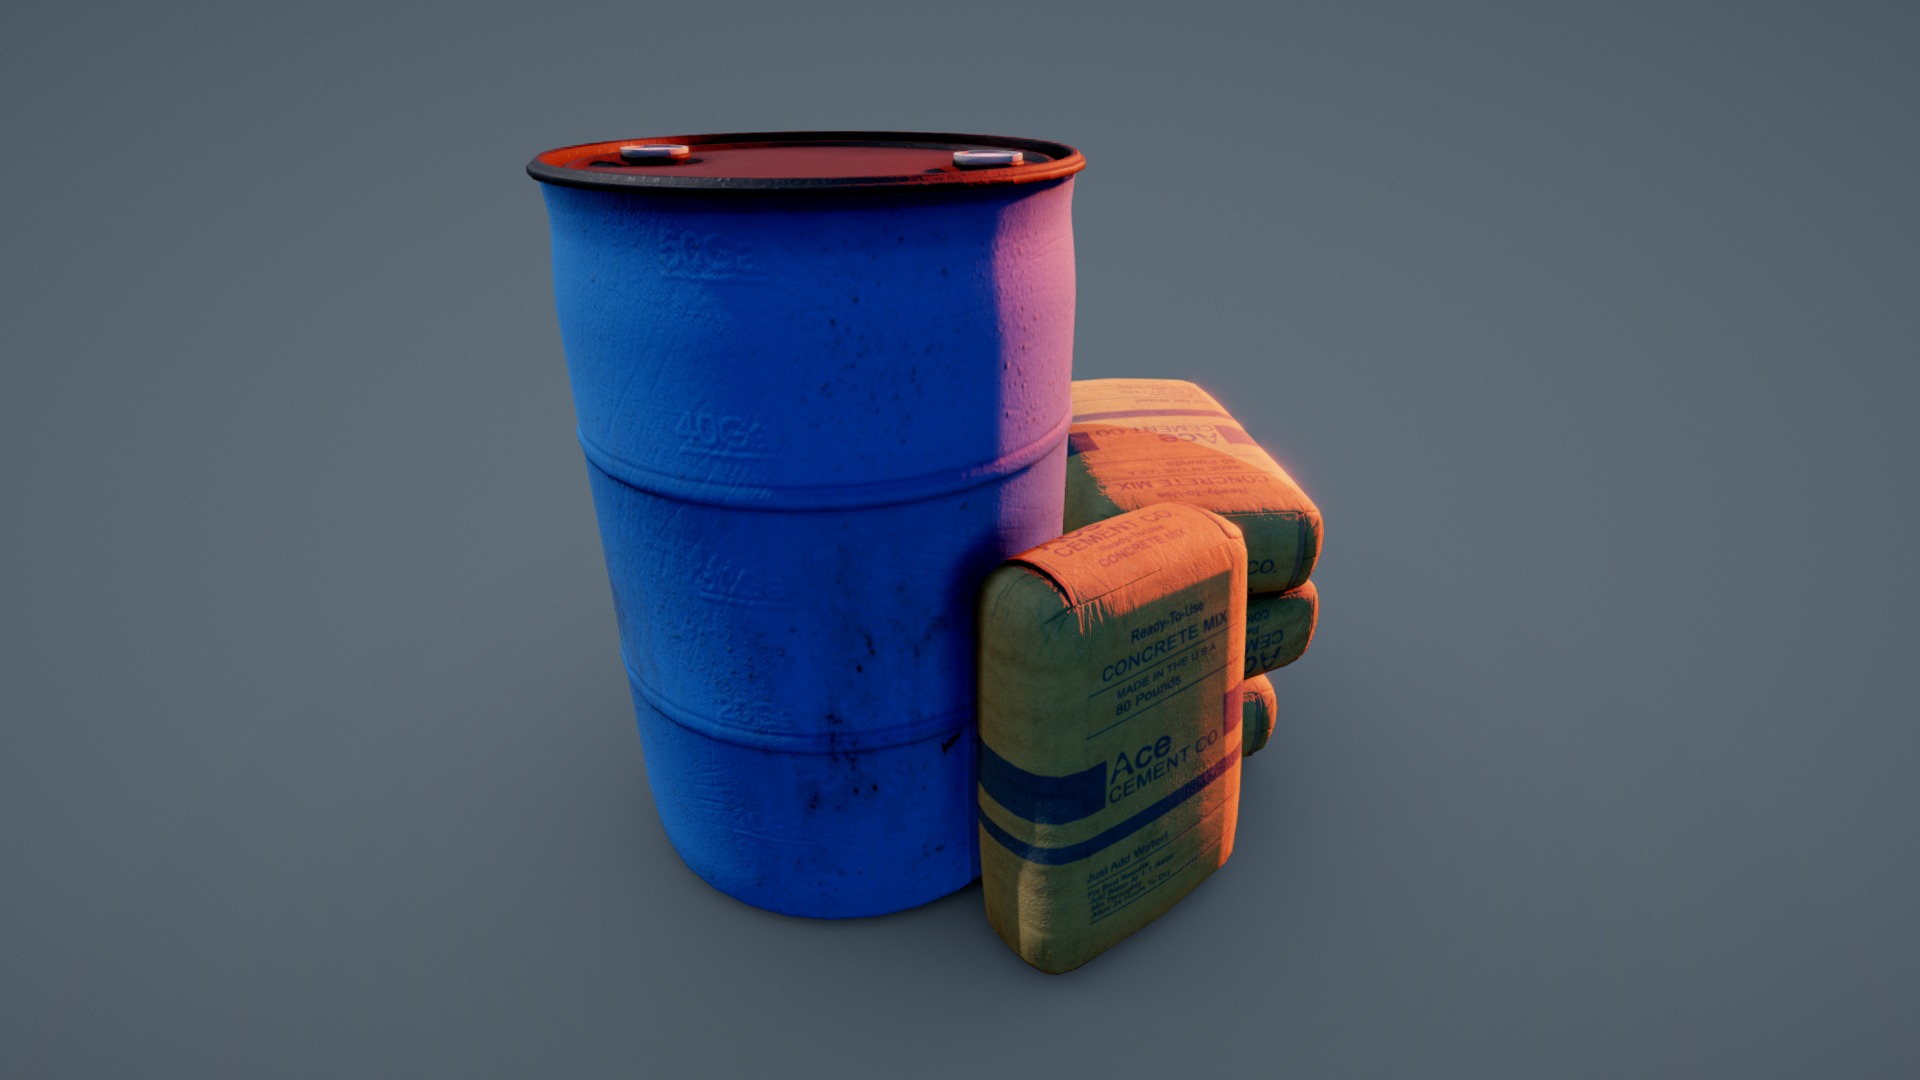 3D model Water Barrel & Concrete Mix - This is a 3D model of the Water Barrel & Concrete Mix. The 3D model is about a blue and red container.